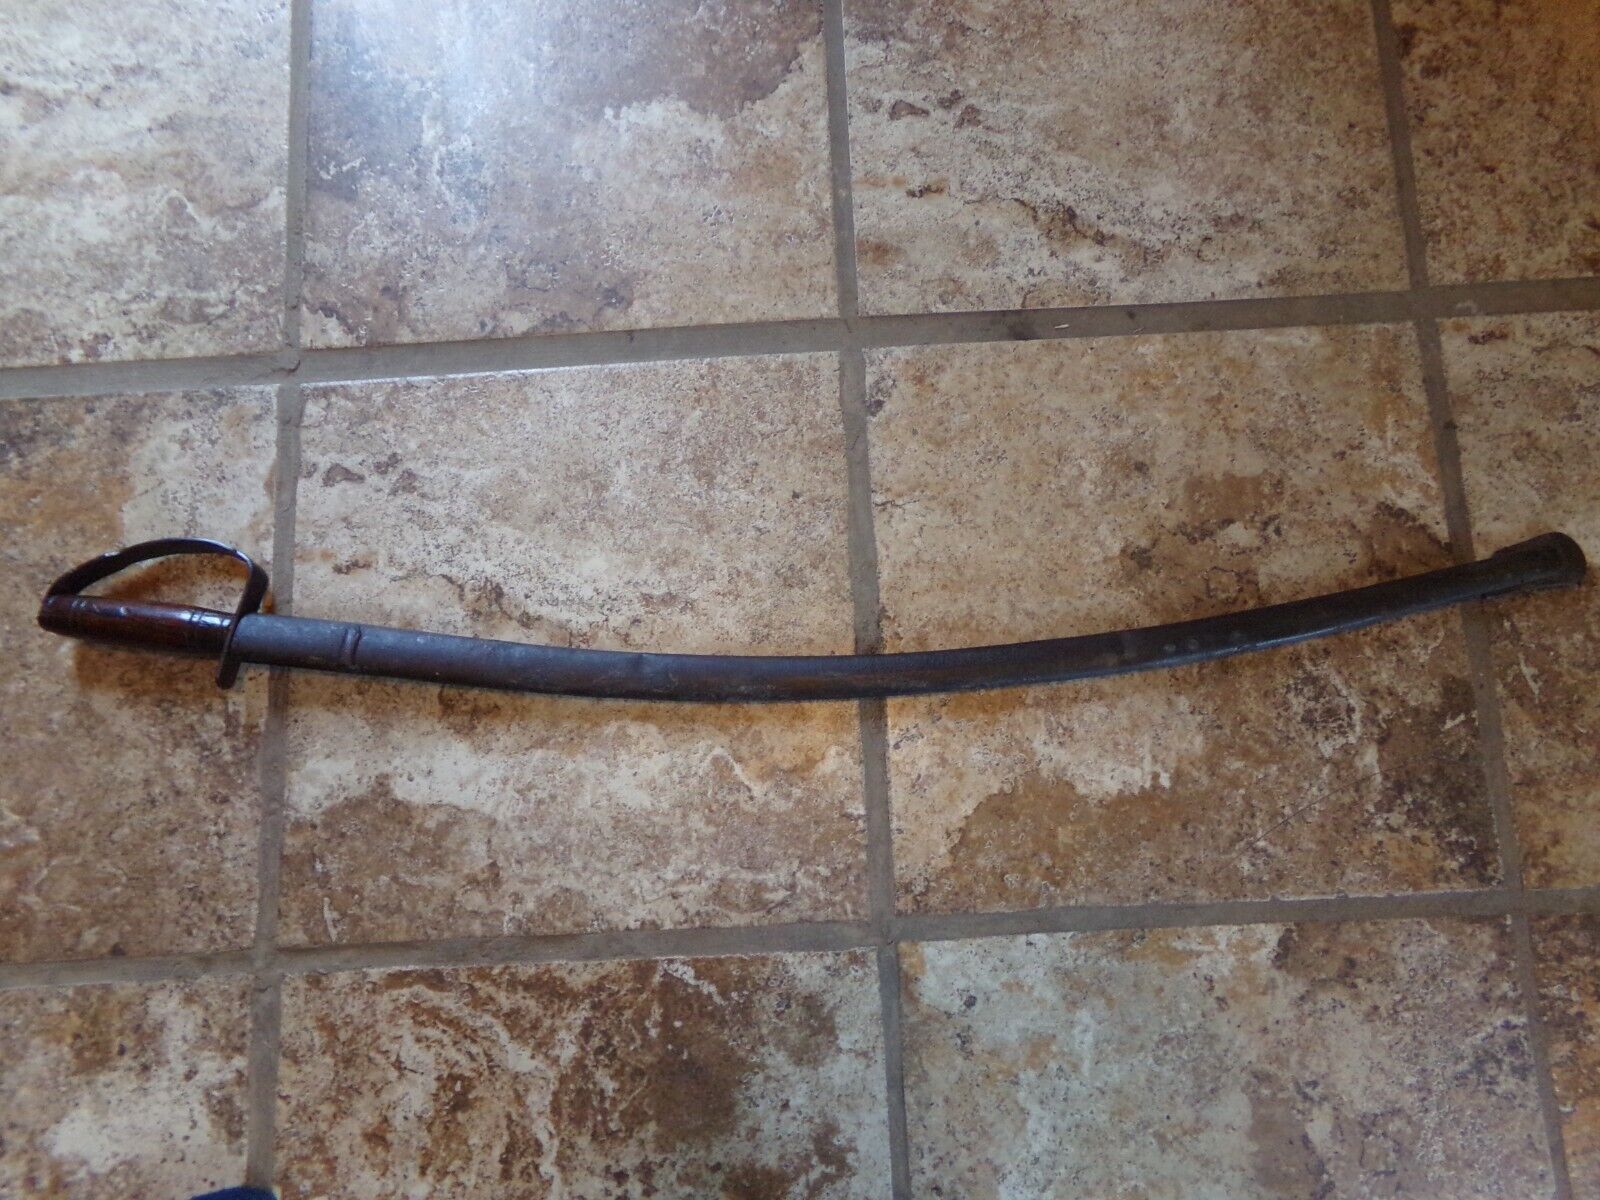 Unkown Early Unmarked Cavalry Sword with Blade Upside Down